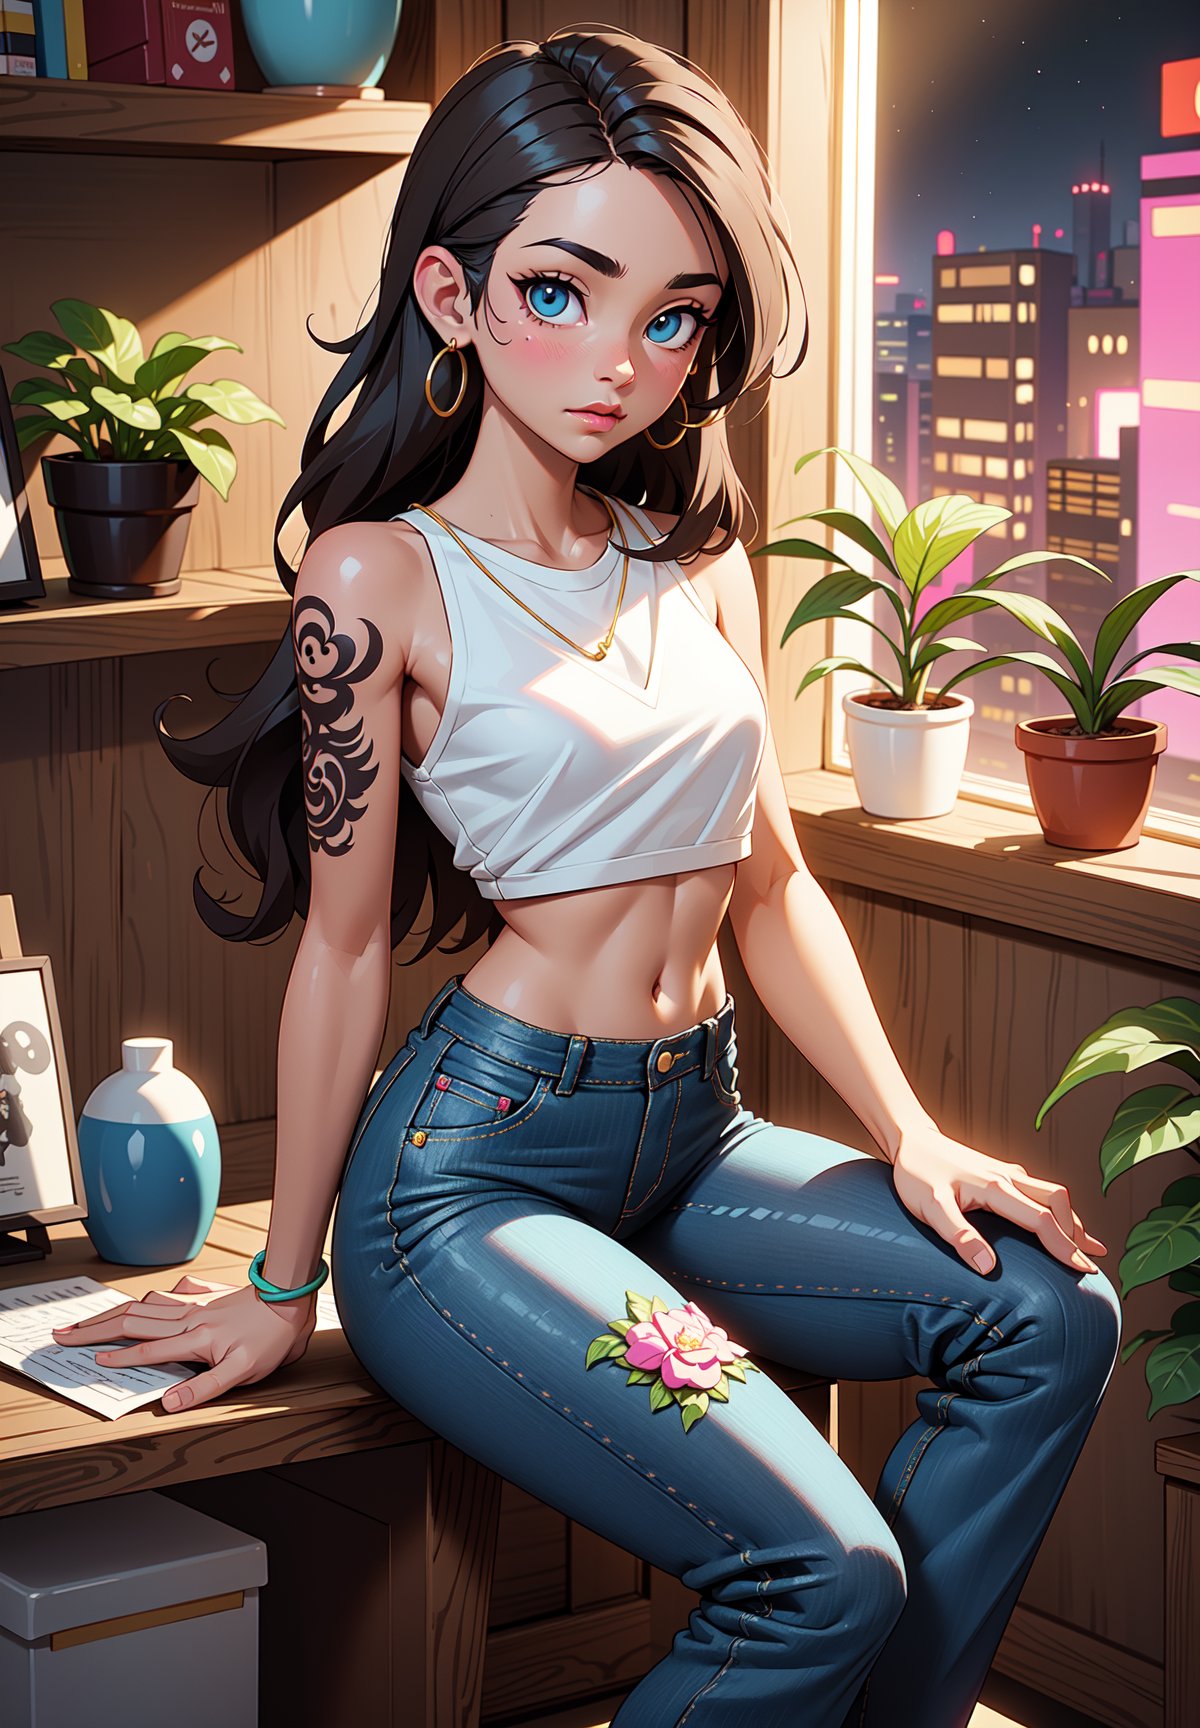 Brown Eyes, brown Eyes, Black pants, drawing, painting on paper, inks, ink pots, shelf((Masterpiece)), (Best Quality), Art, Highly Detailed, Extremely Detailed CG Unity 8k Wallpaper, (Curves: 0.8), (Full Body: 0.6), 3DMM, (Masterpiece, Best Quality) black hair, long hair, tanned skin, tanned skin, brown eyes, sitting, white sleeveless shirt, no bra, small chest, tattoos, tattoo on the arm, sitting, drawing, jeans, black pants, cartoonist, tattoo studio , white walls, neon pink lights, neon lights, pink lights, wooden shelf, flower pots, plants, decorative plants, window, window, city view, tattoo chair, tattoo artist, tattoo girl, 12334, Q , perfect eyes,12334